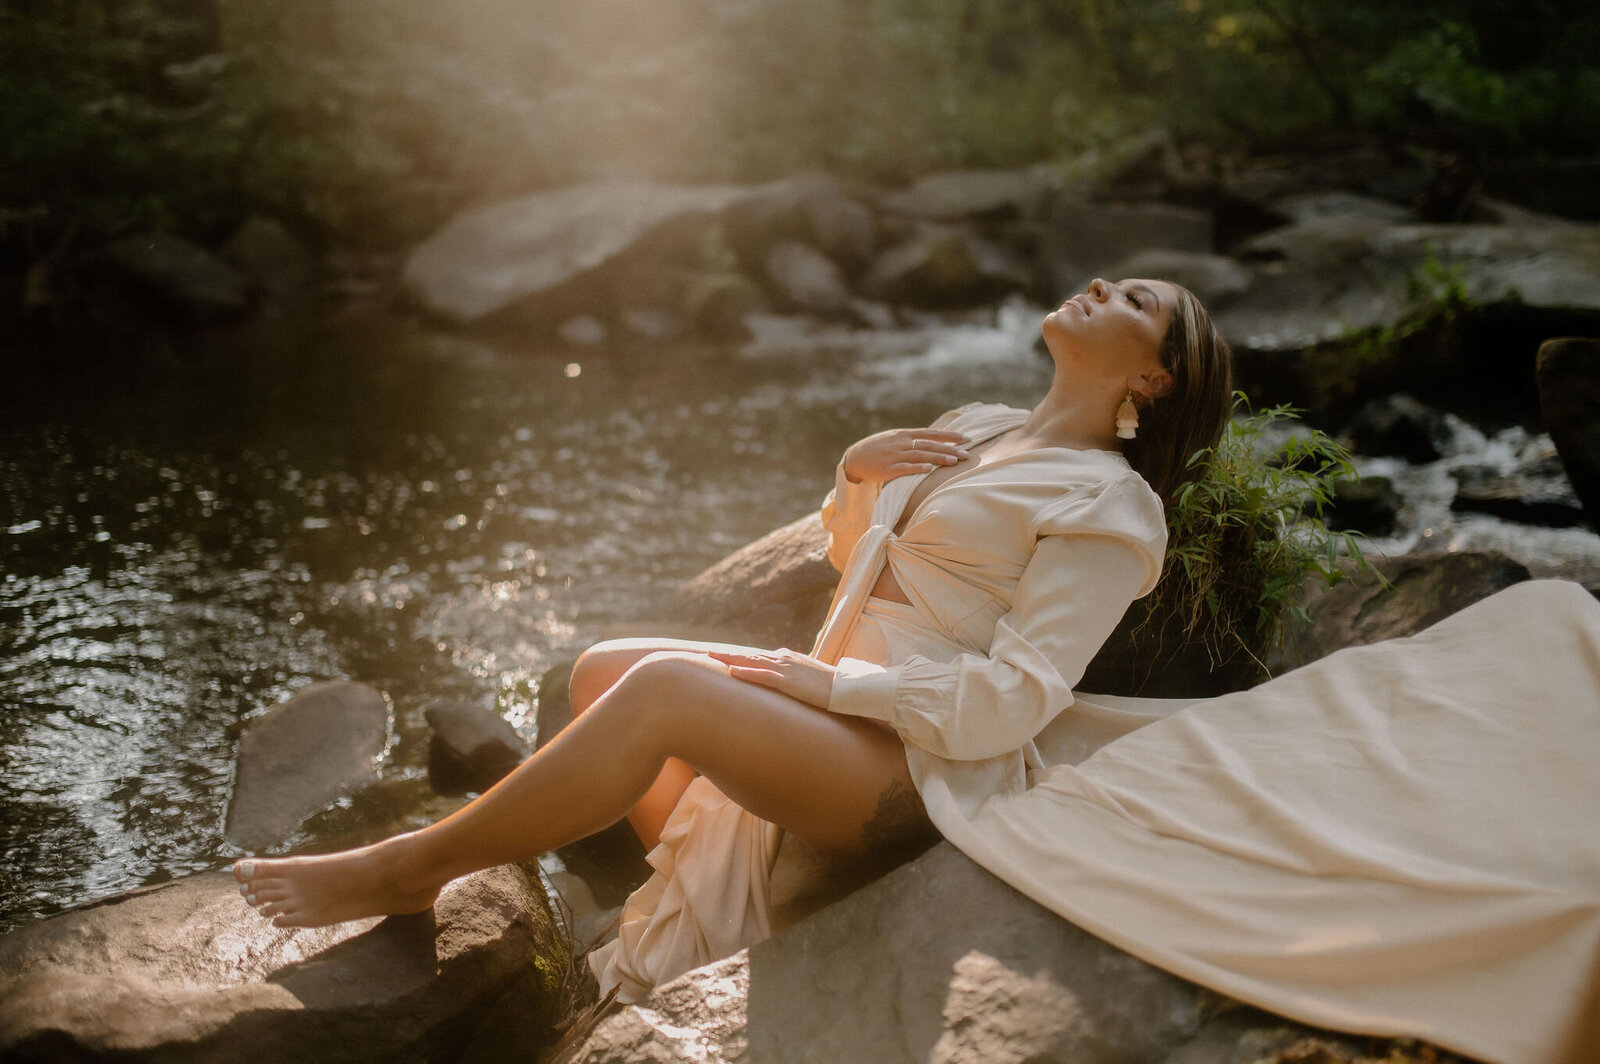 woman in cream dress sitting on rocks in creek peacefully stroking chest with face lifted toward sun